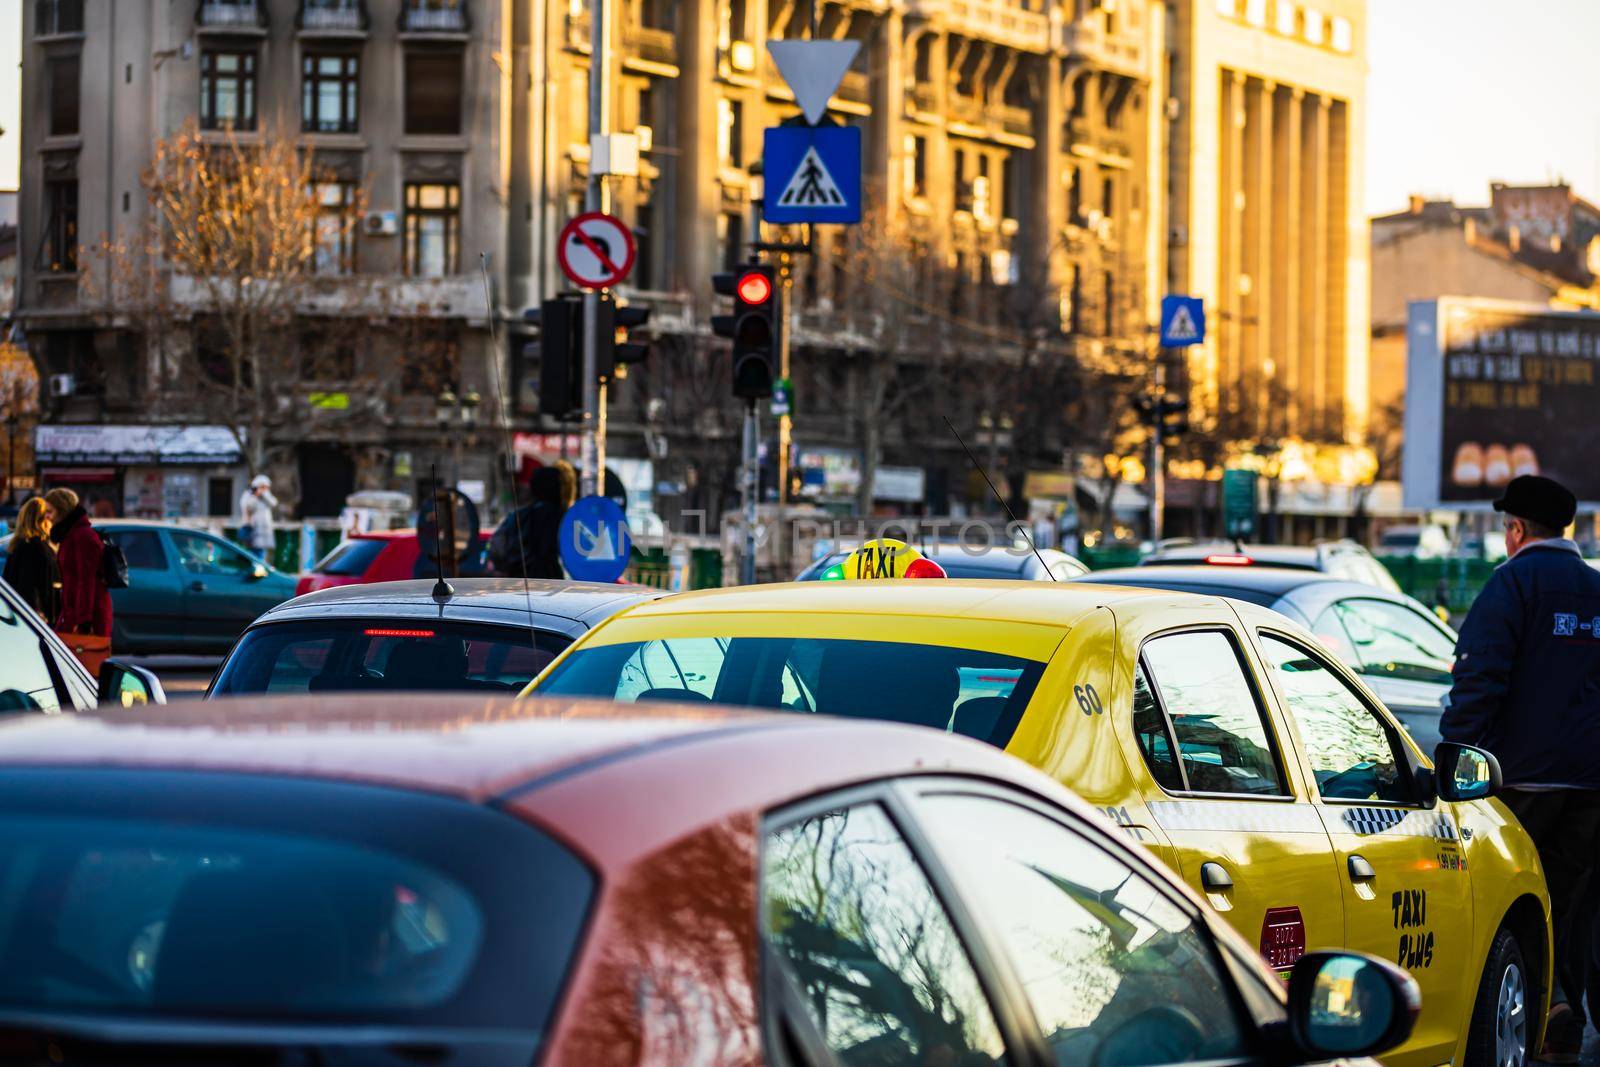 Car traffic at rush hour in downtown area of the city. Car pollution, traffic jam in the morning and evening in the capital city of Bucharest, Romania, 2021 by vladispas